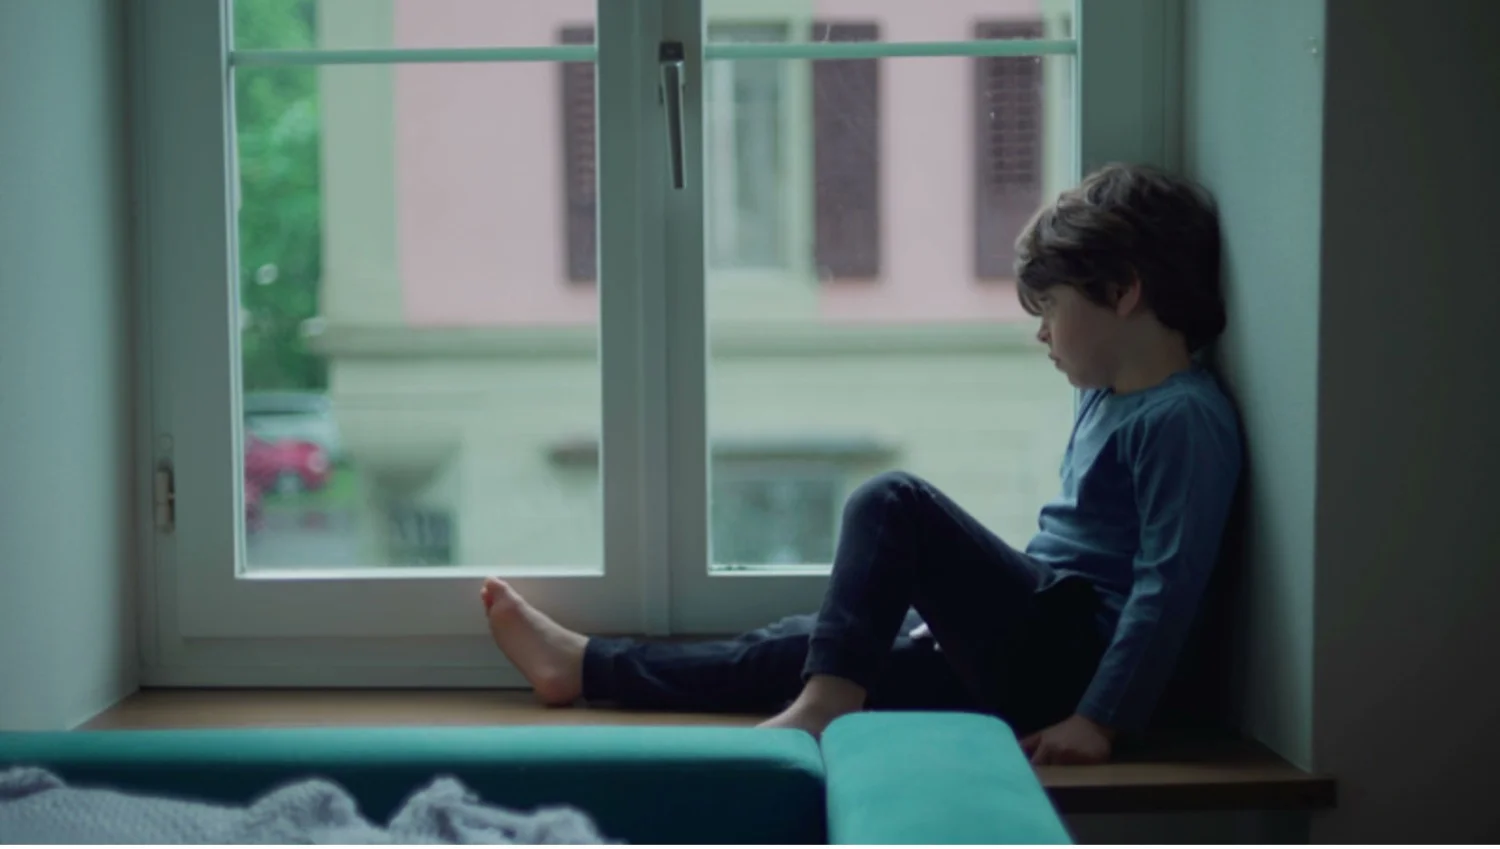 Sad young boy sits in a windowsill and looks out the window